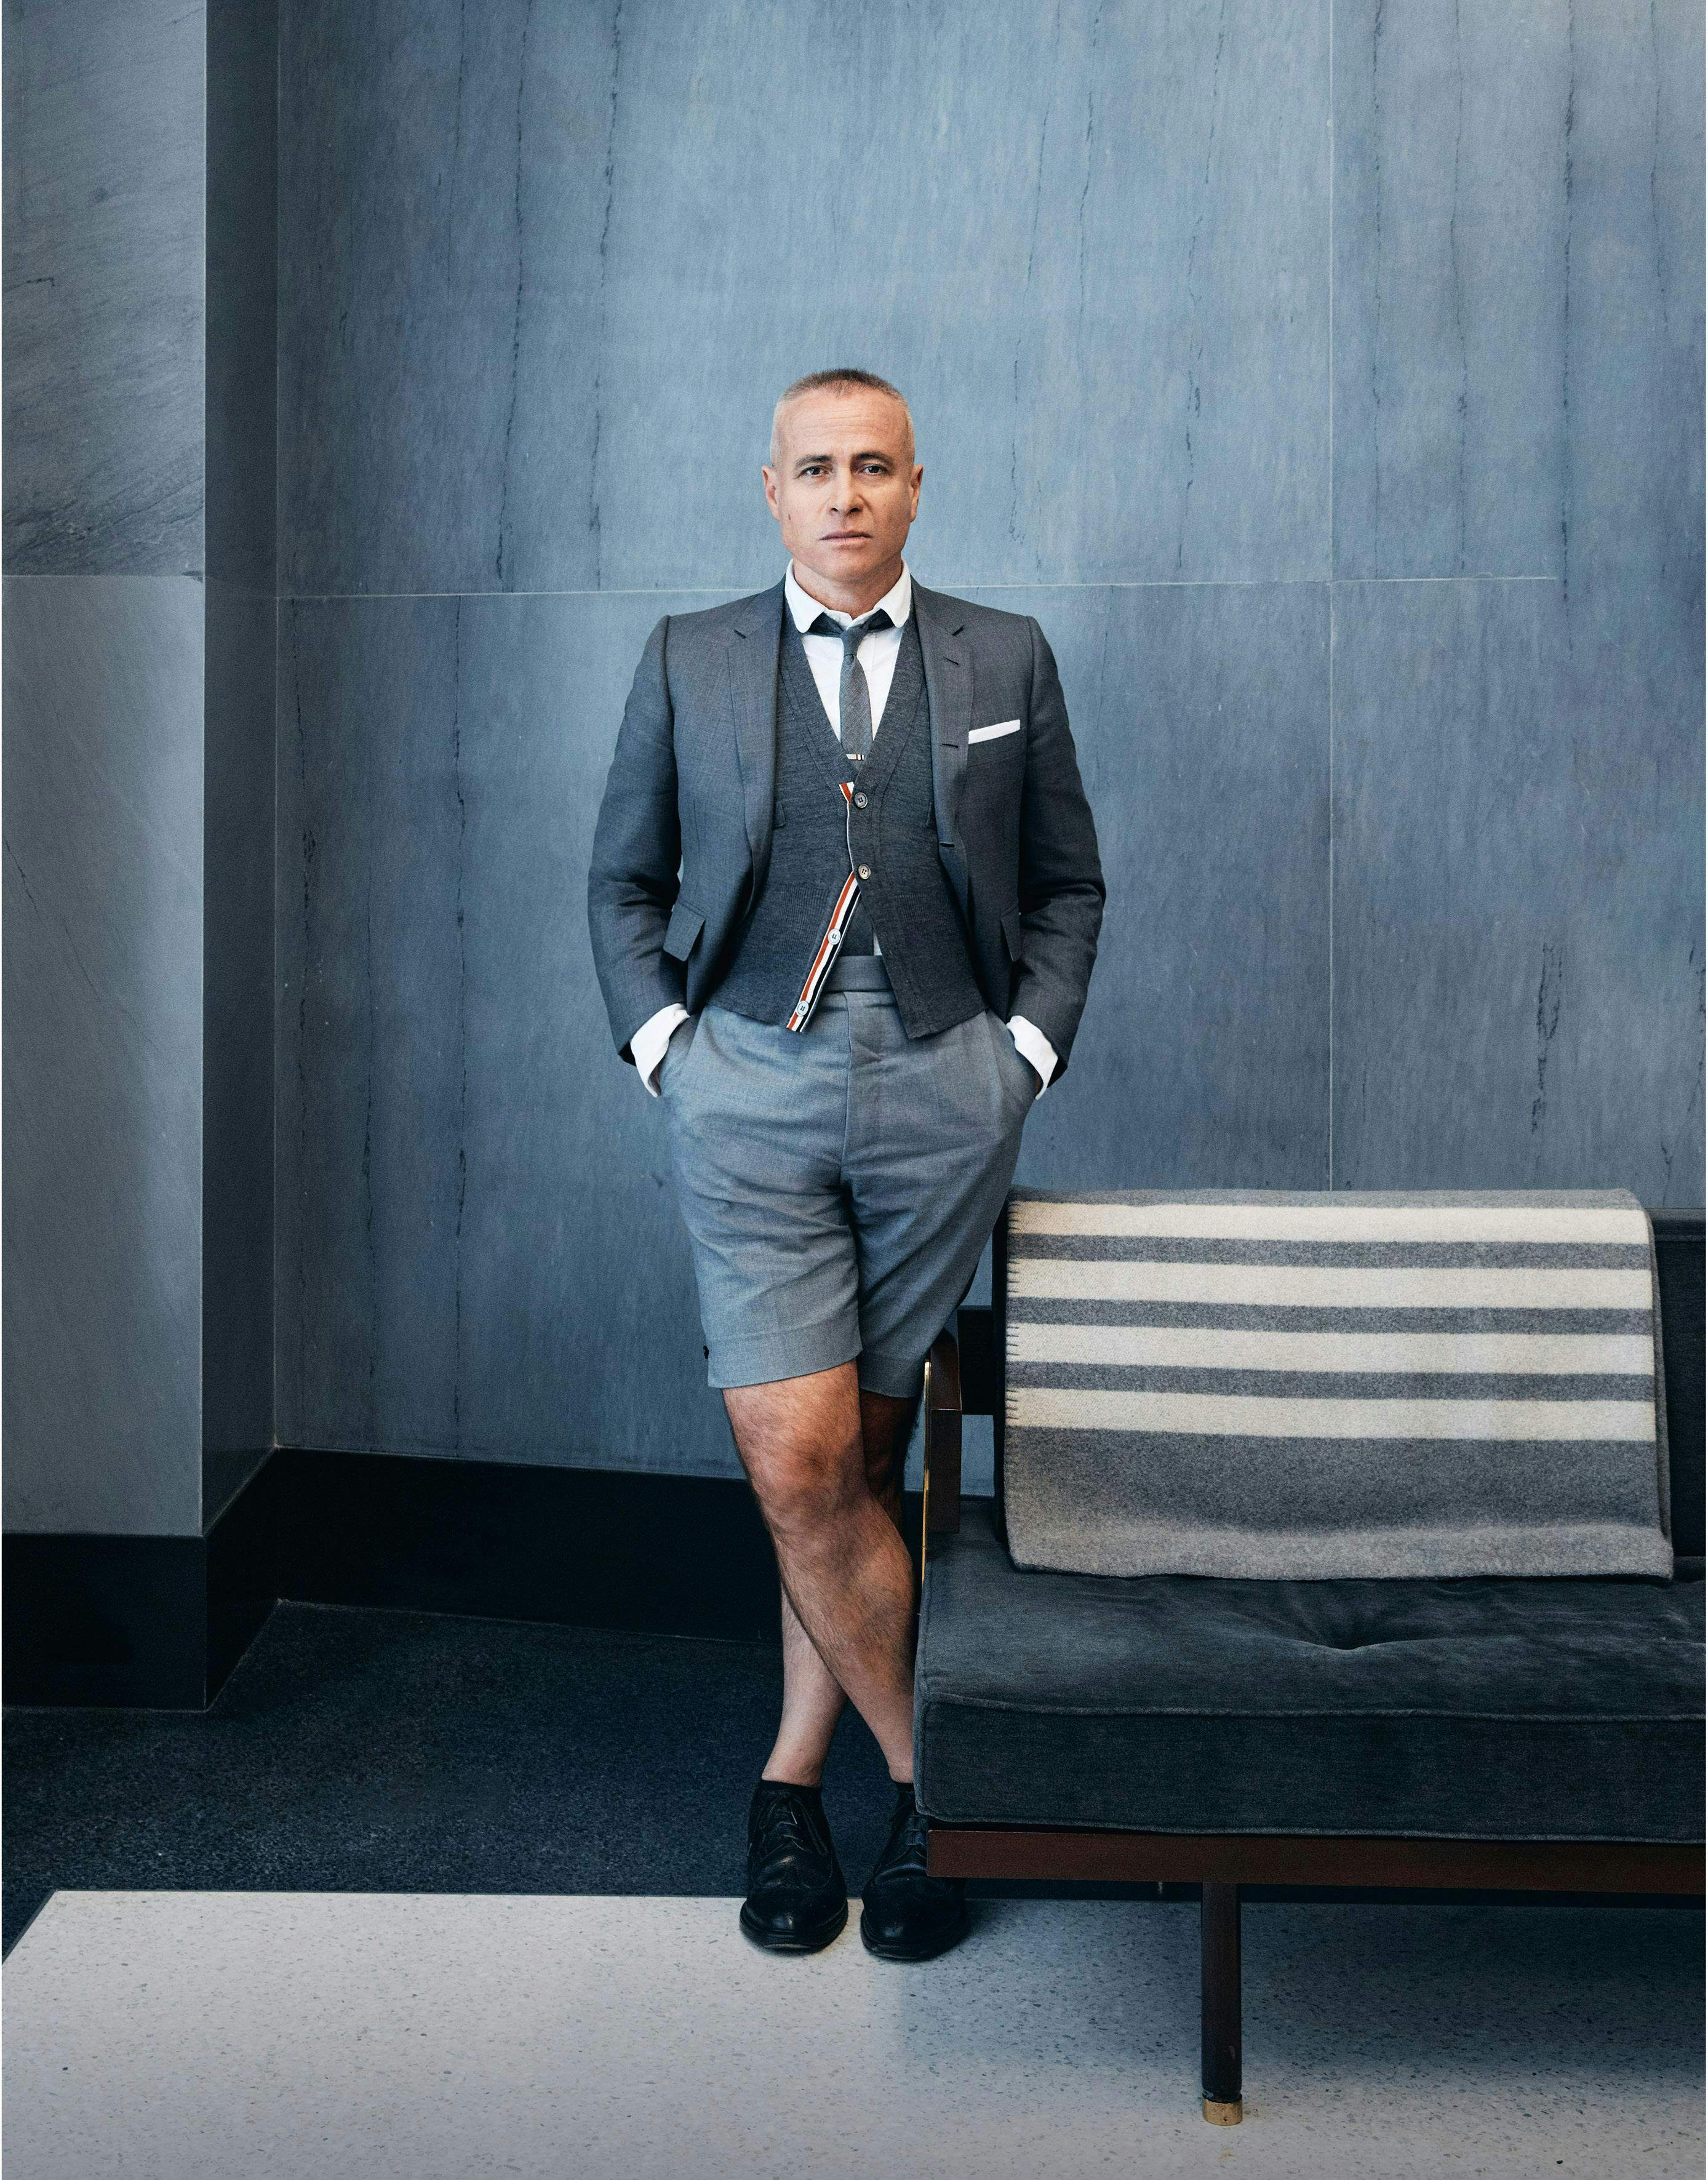 Thom Browne standing in a gray suit  top and shorts